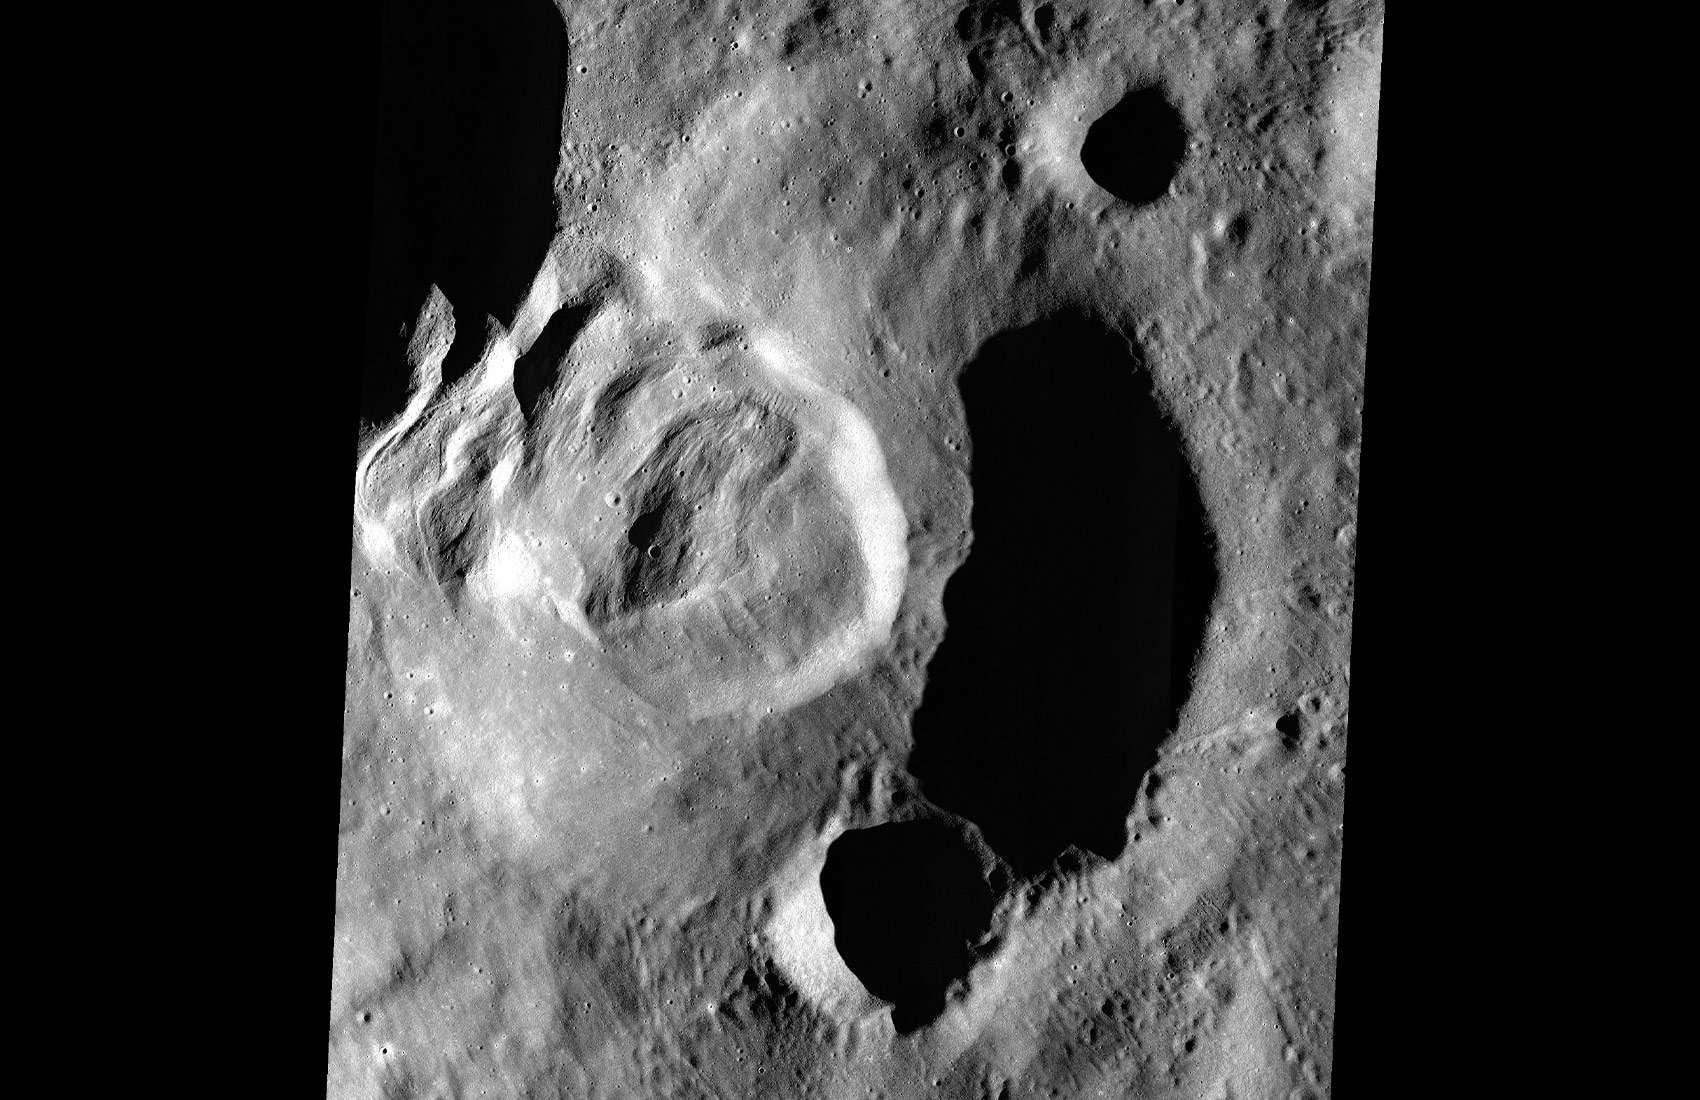 Long ago, an immense landslide occurred on the Moon’s far side in an unnamed crater inside the much larger Klute crater. Credit: NASA/GSFC/Arizona State University